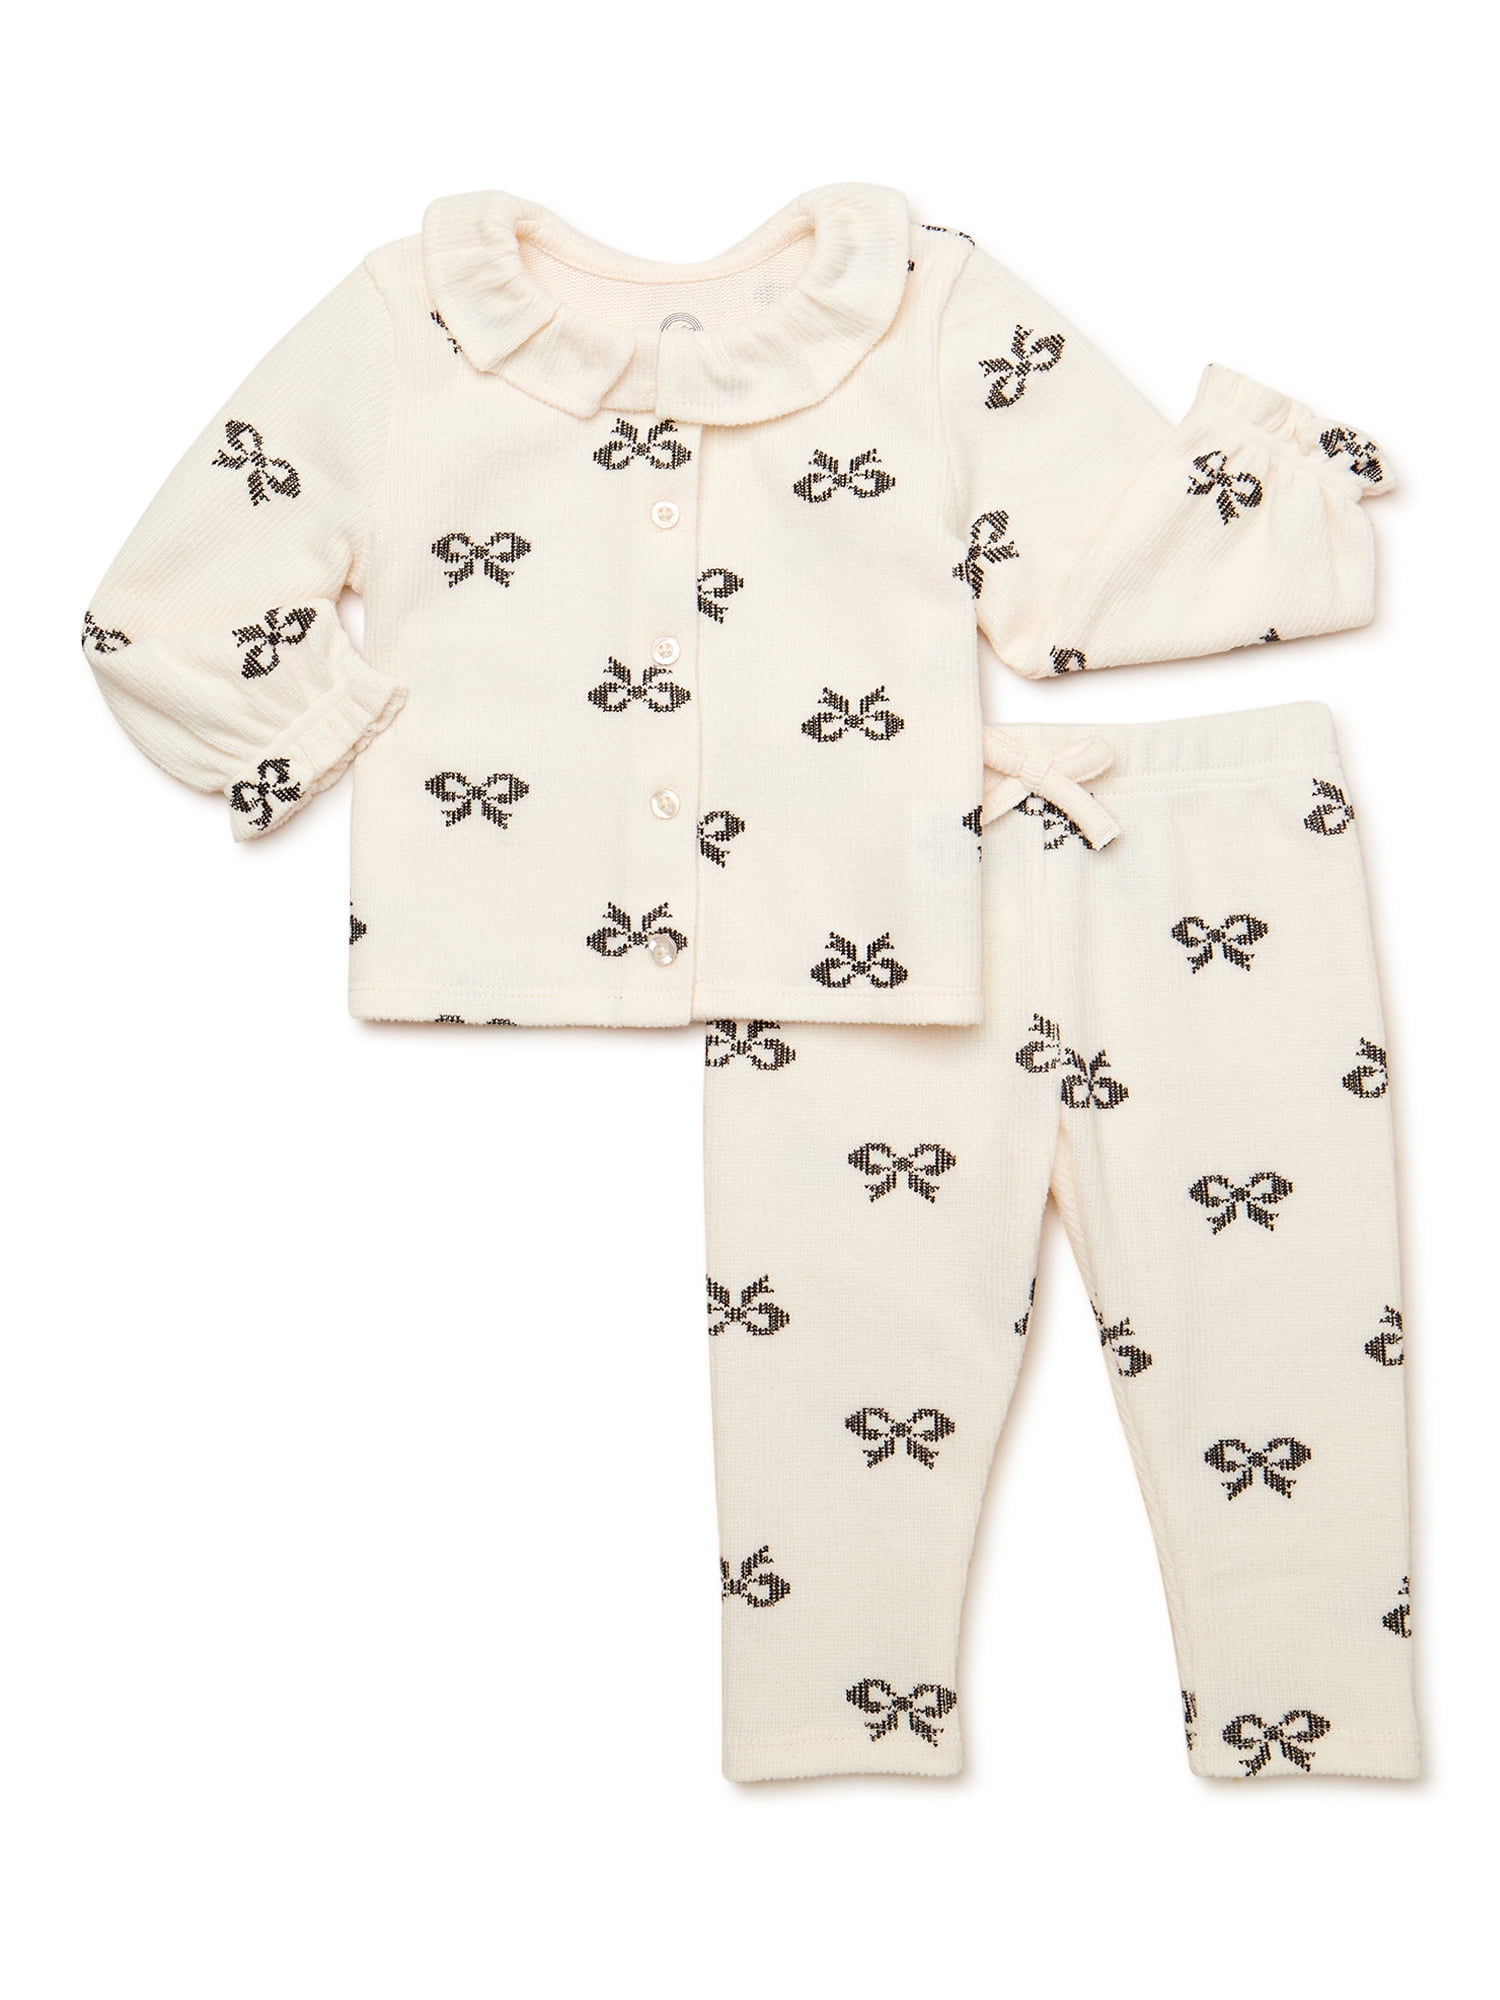 Wonder Nation Baby Girl Cardigan and Pants Outfit Set, 2-Piece, Sizes 0/3-24 Months